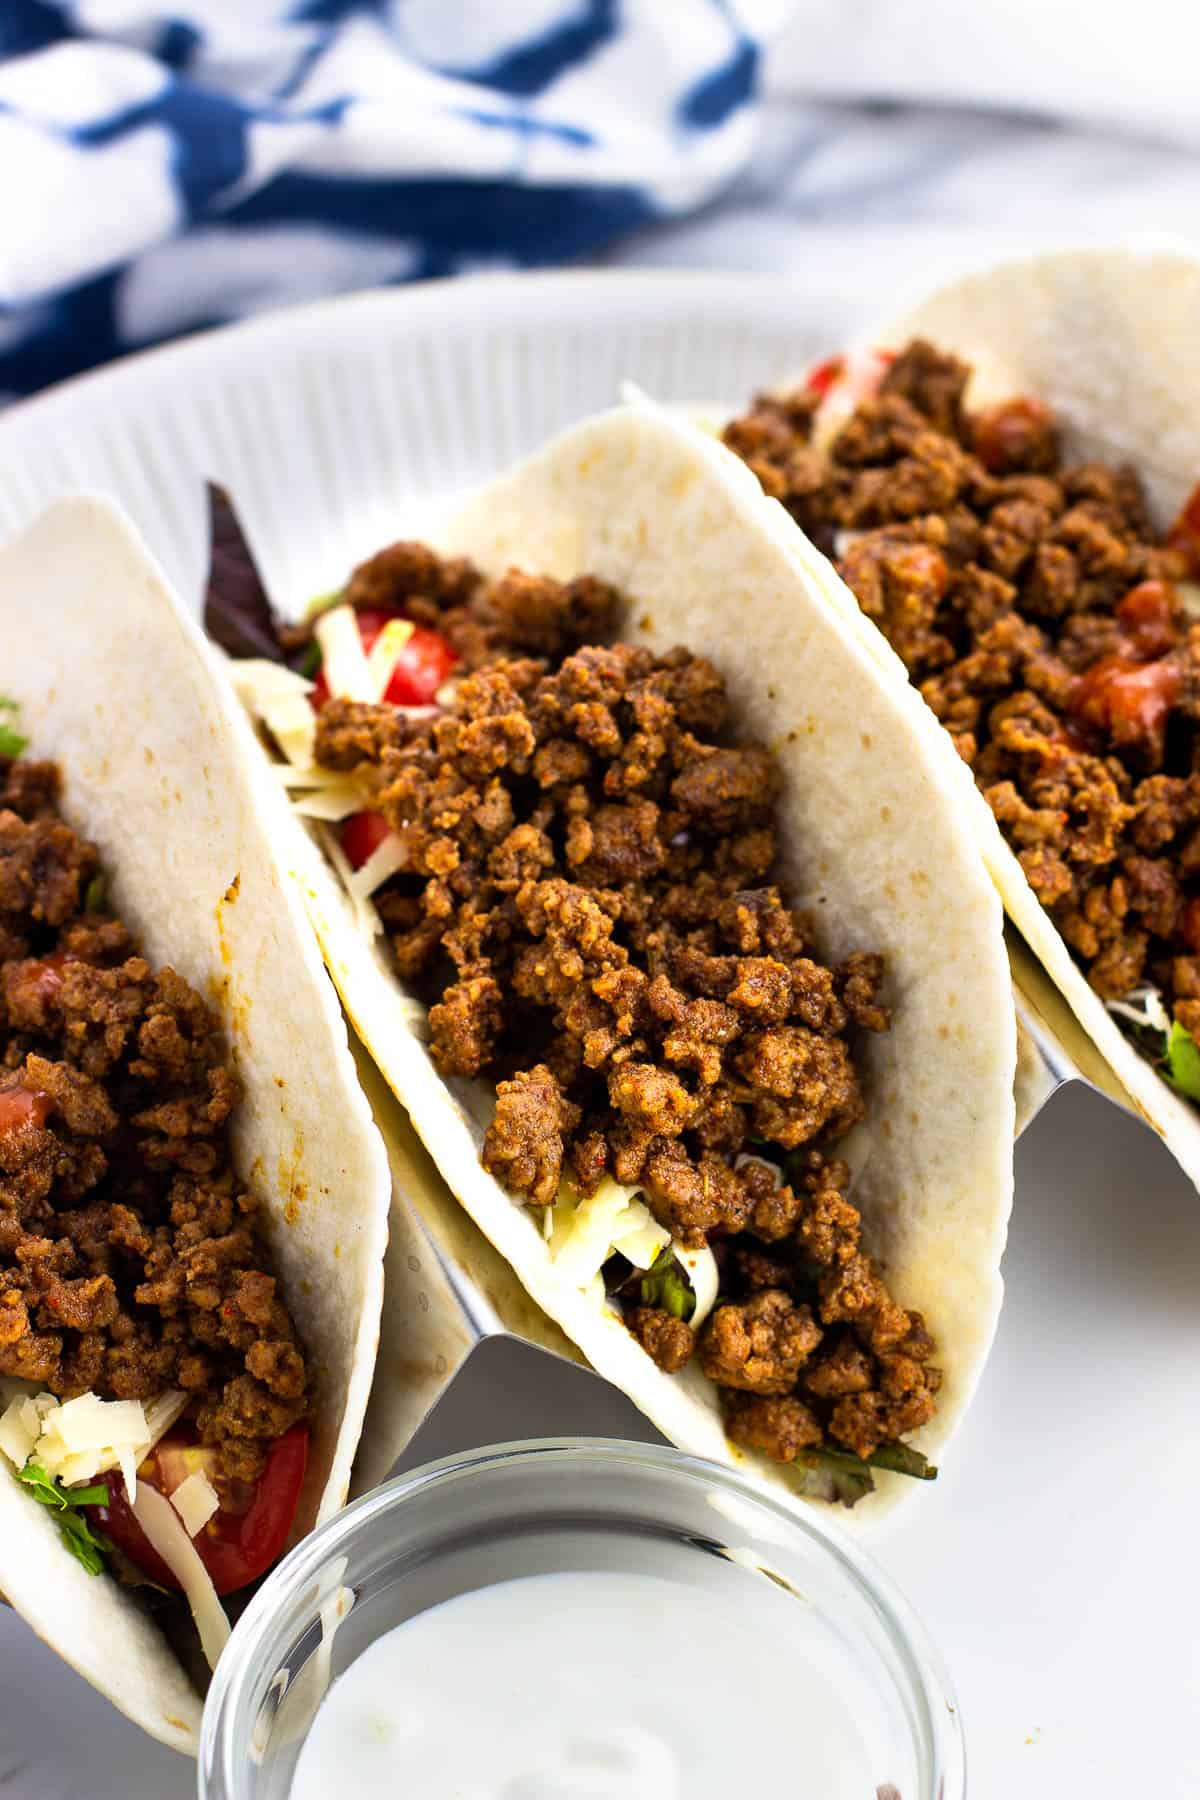 Three beef tacos on a plate.